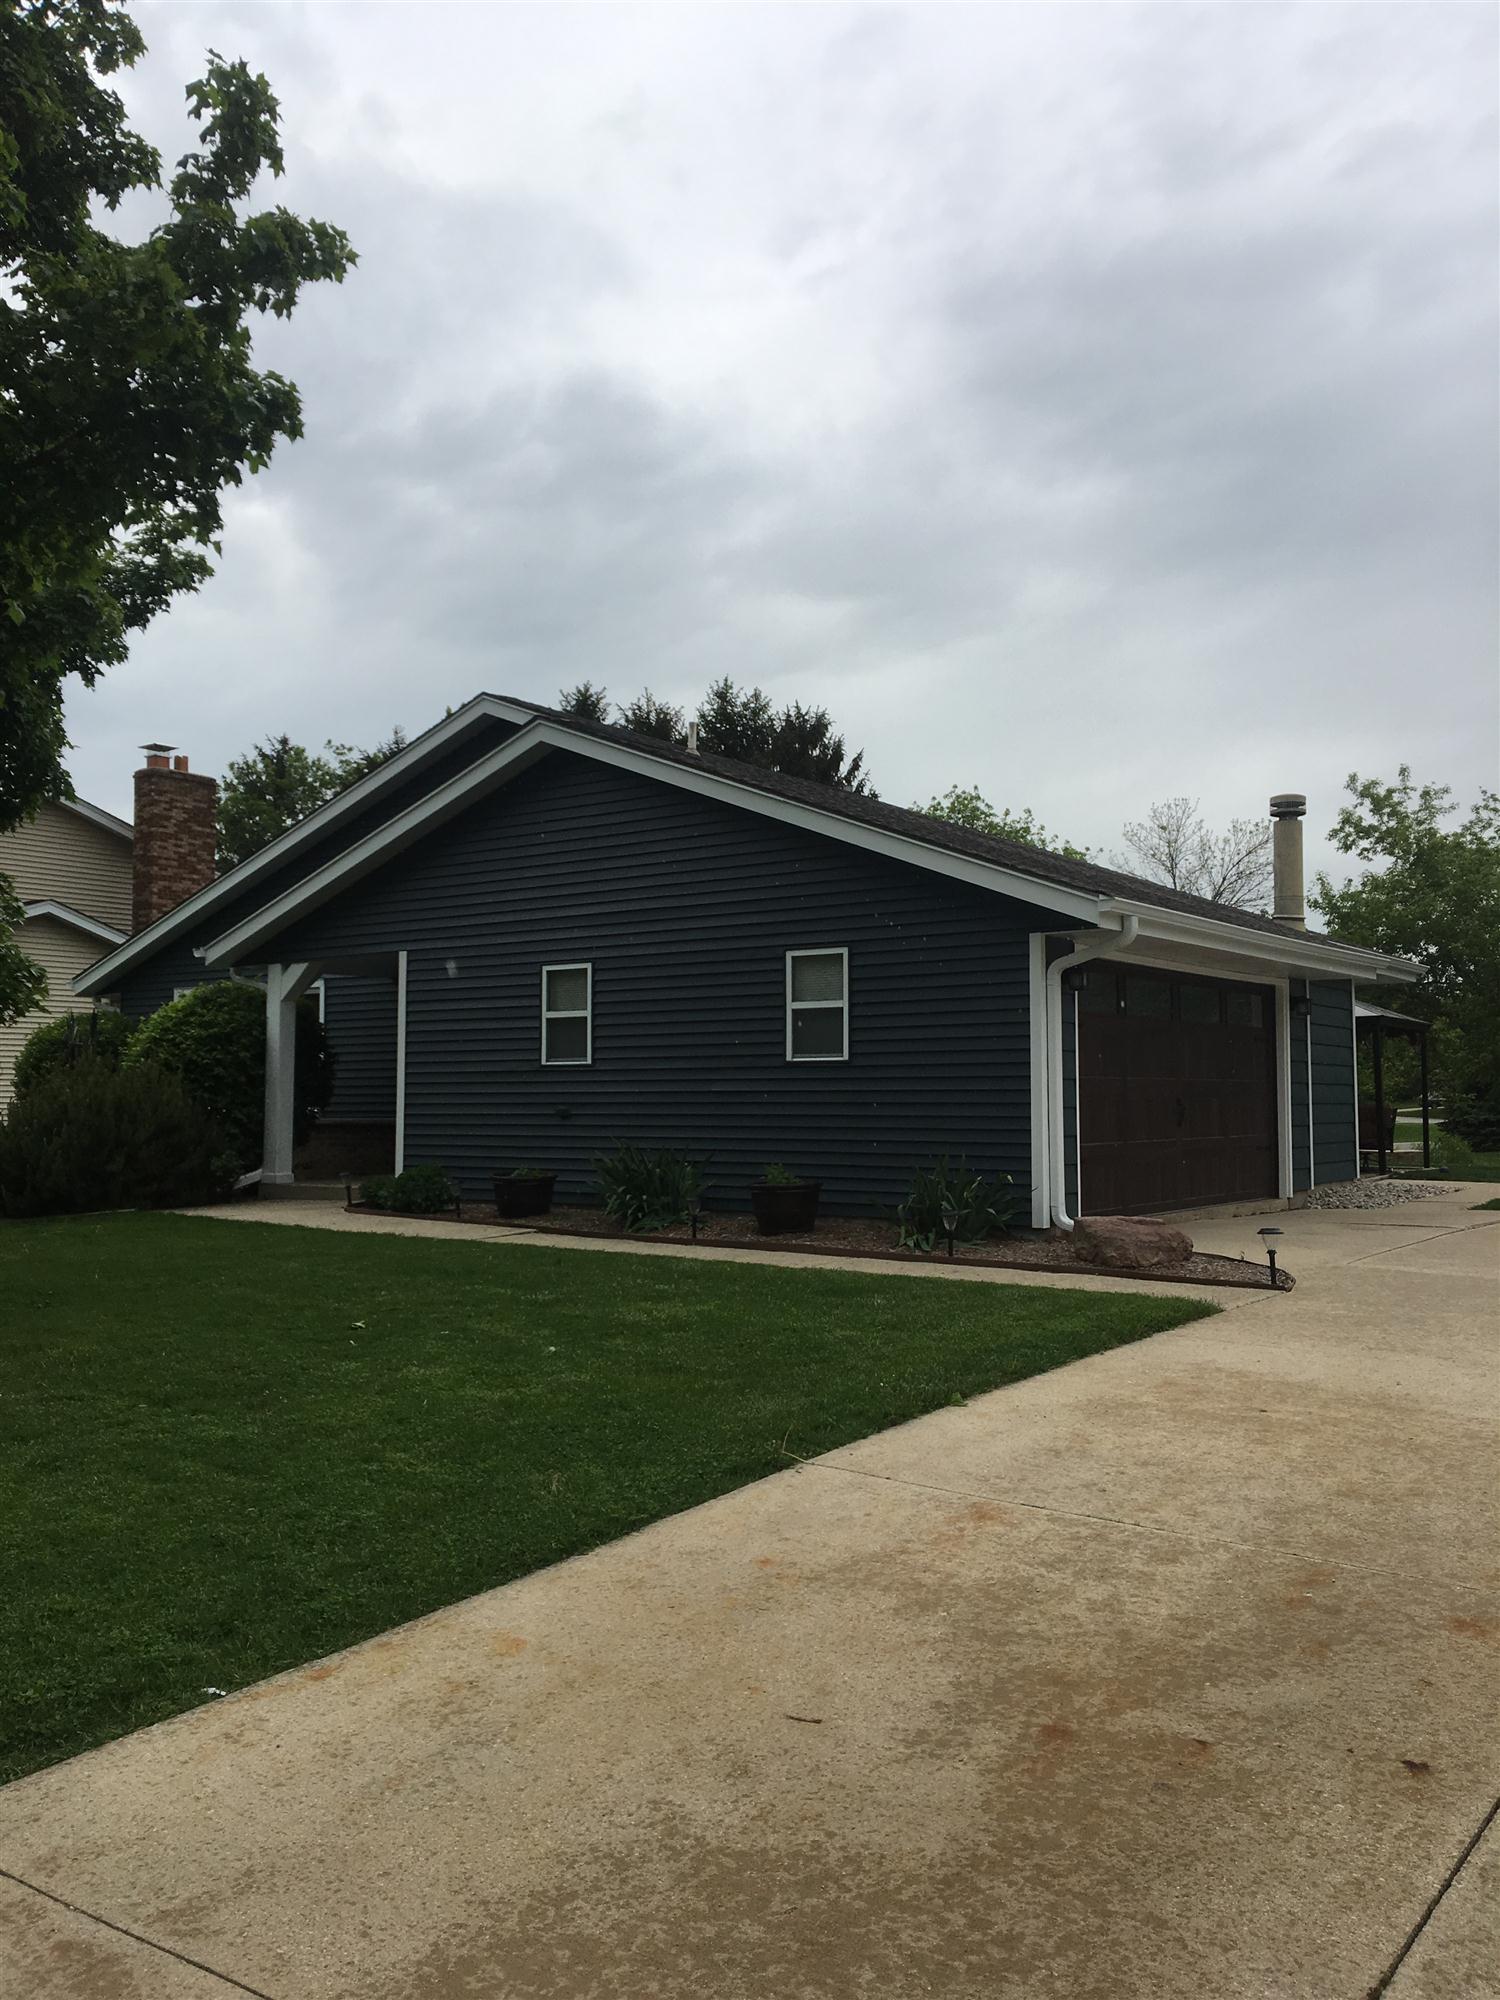 Mequon garage painting services completed this exterior painting job